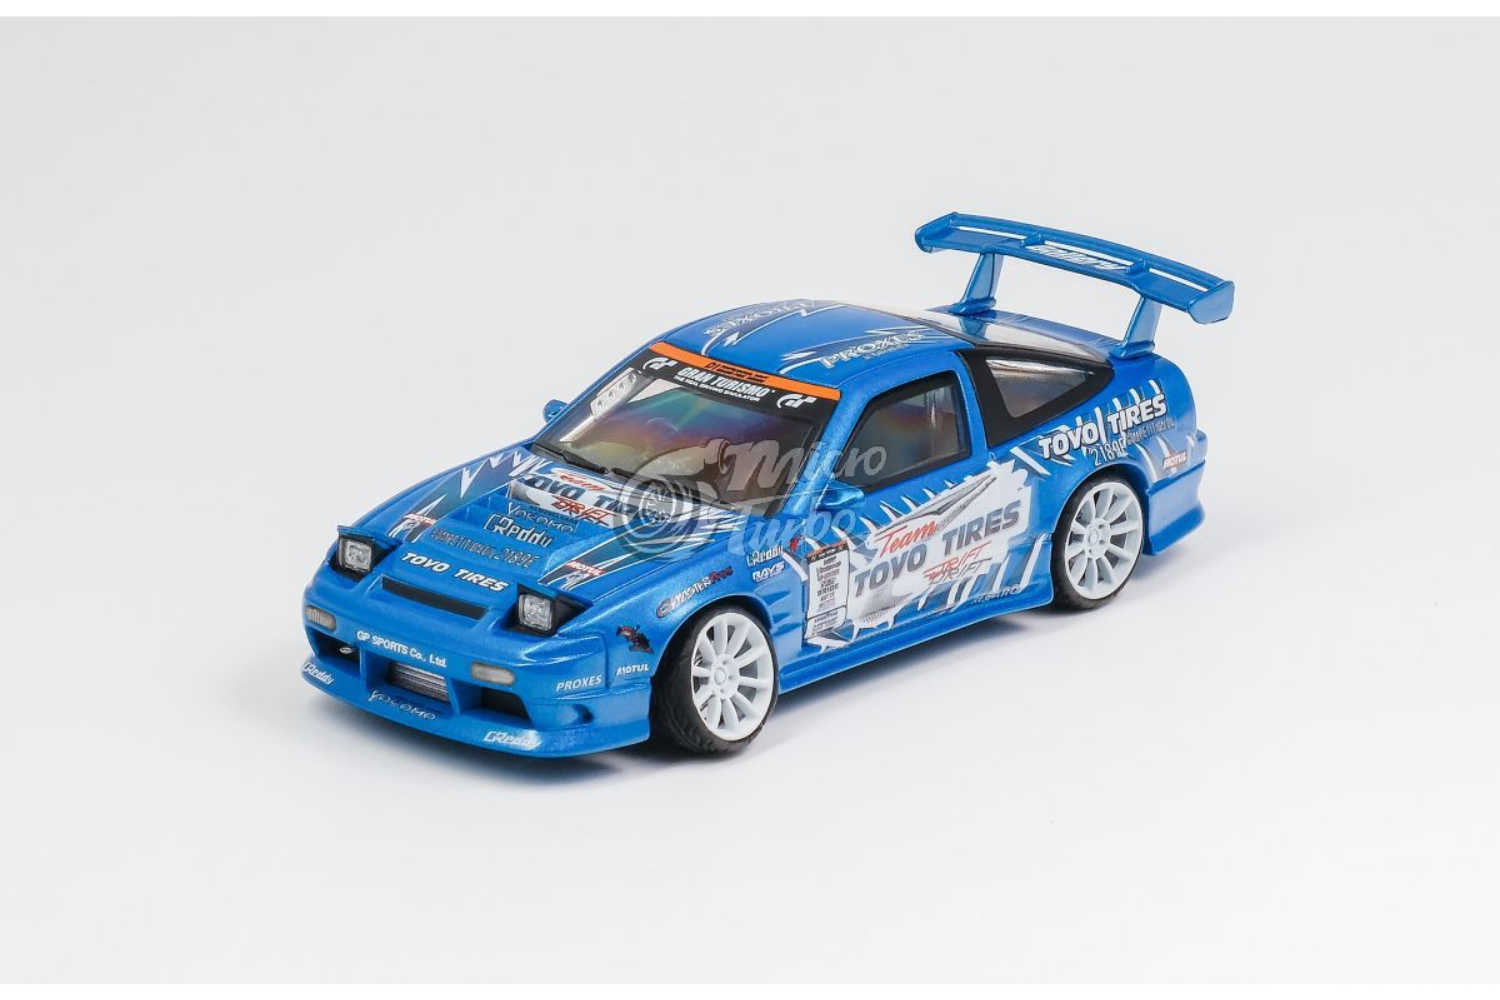 Micro Turbo 1/64 Nissan 180SX in Toyo Tires Drift Livery